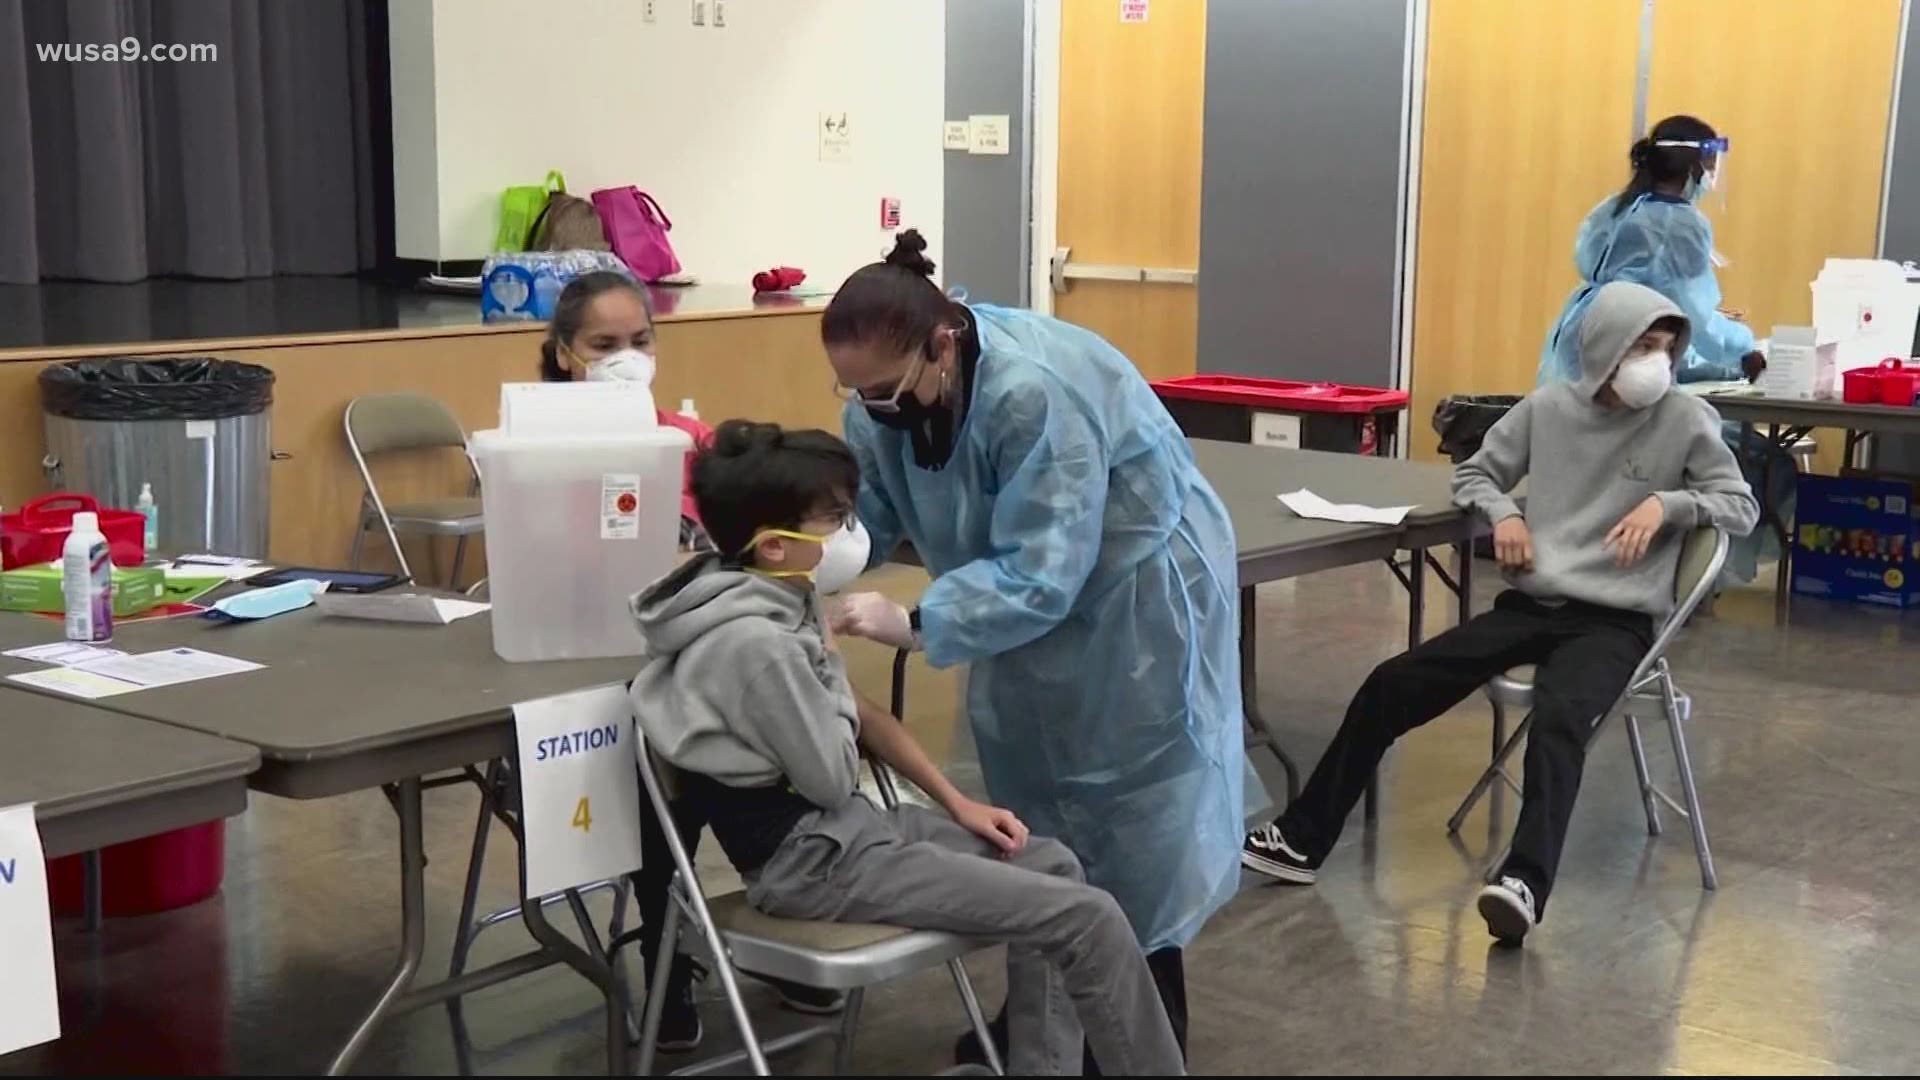 Four DC Public Schools are now open as vaccine clinics for anyone over the age of 12.